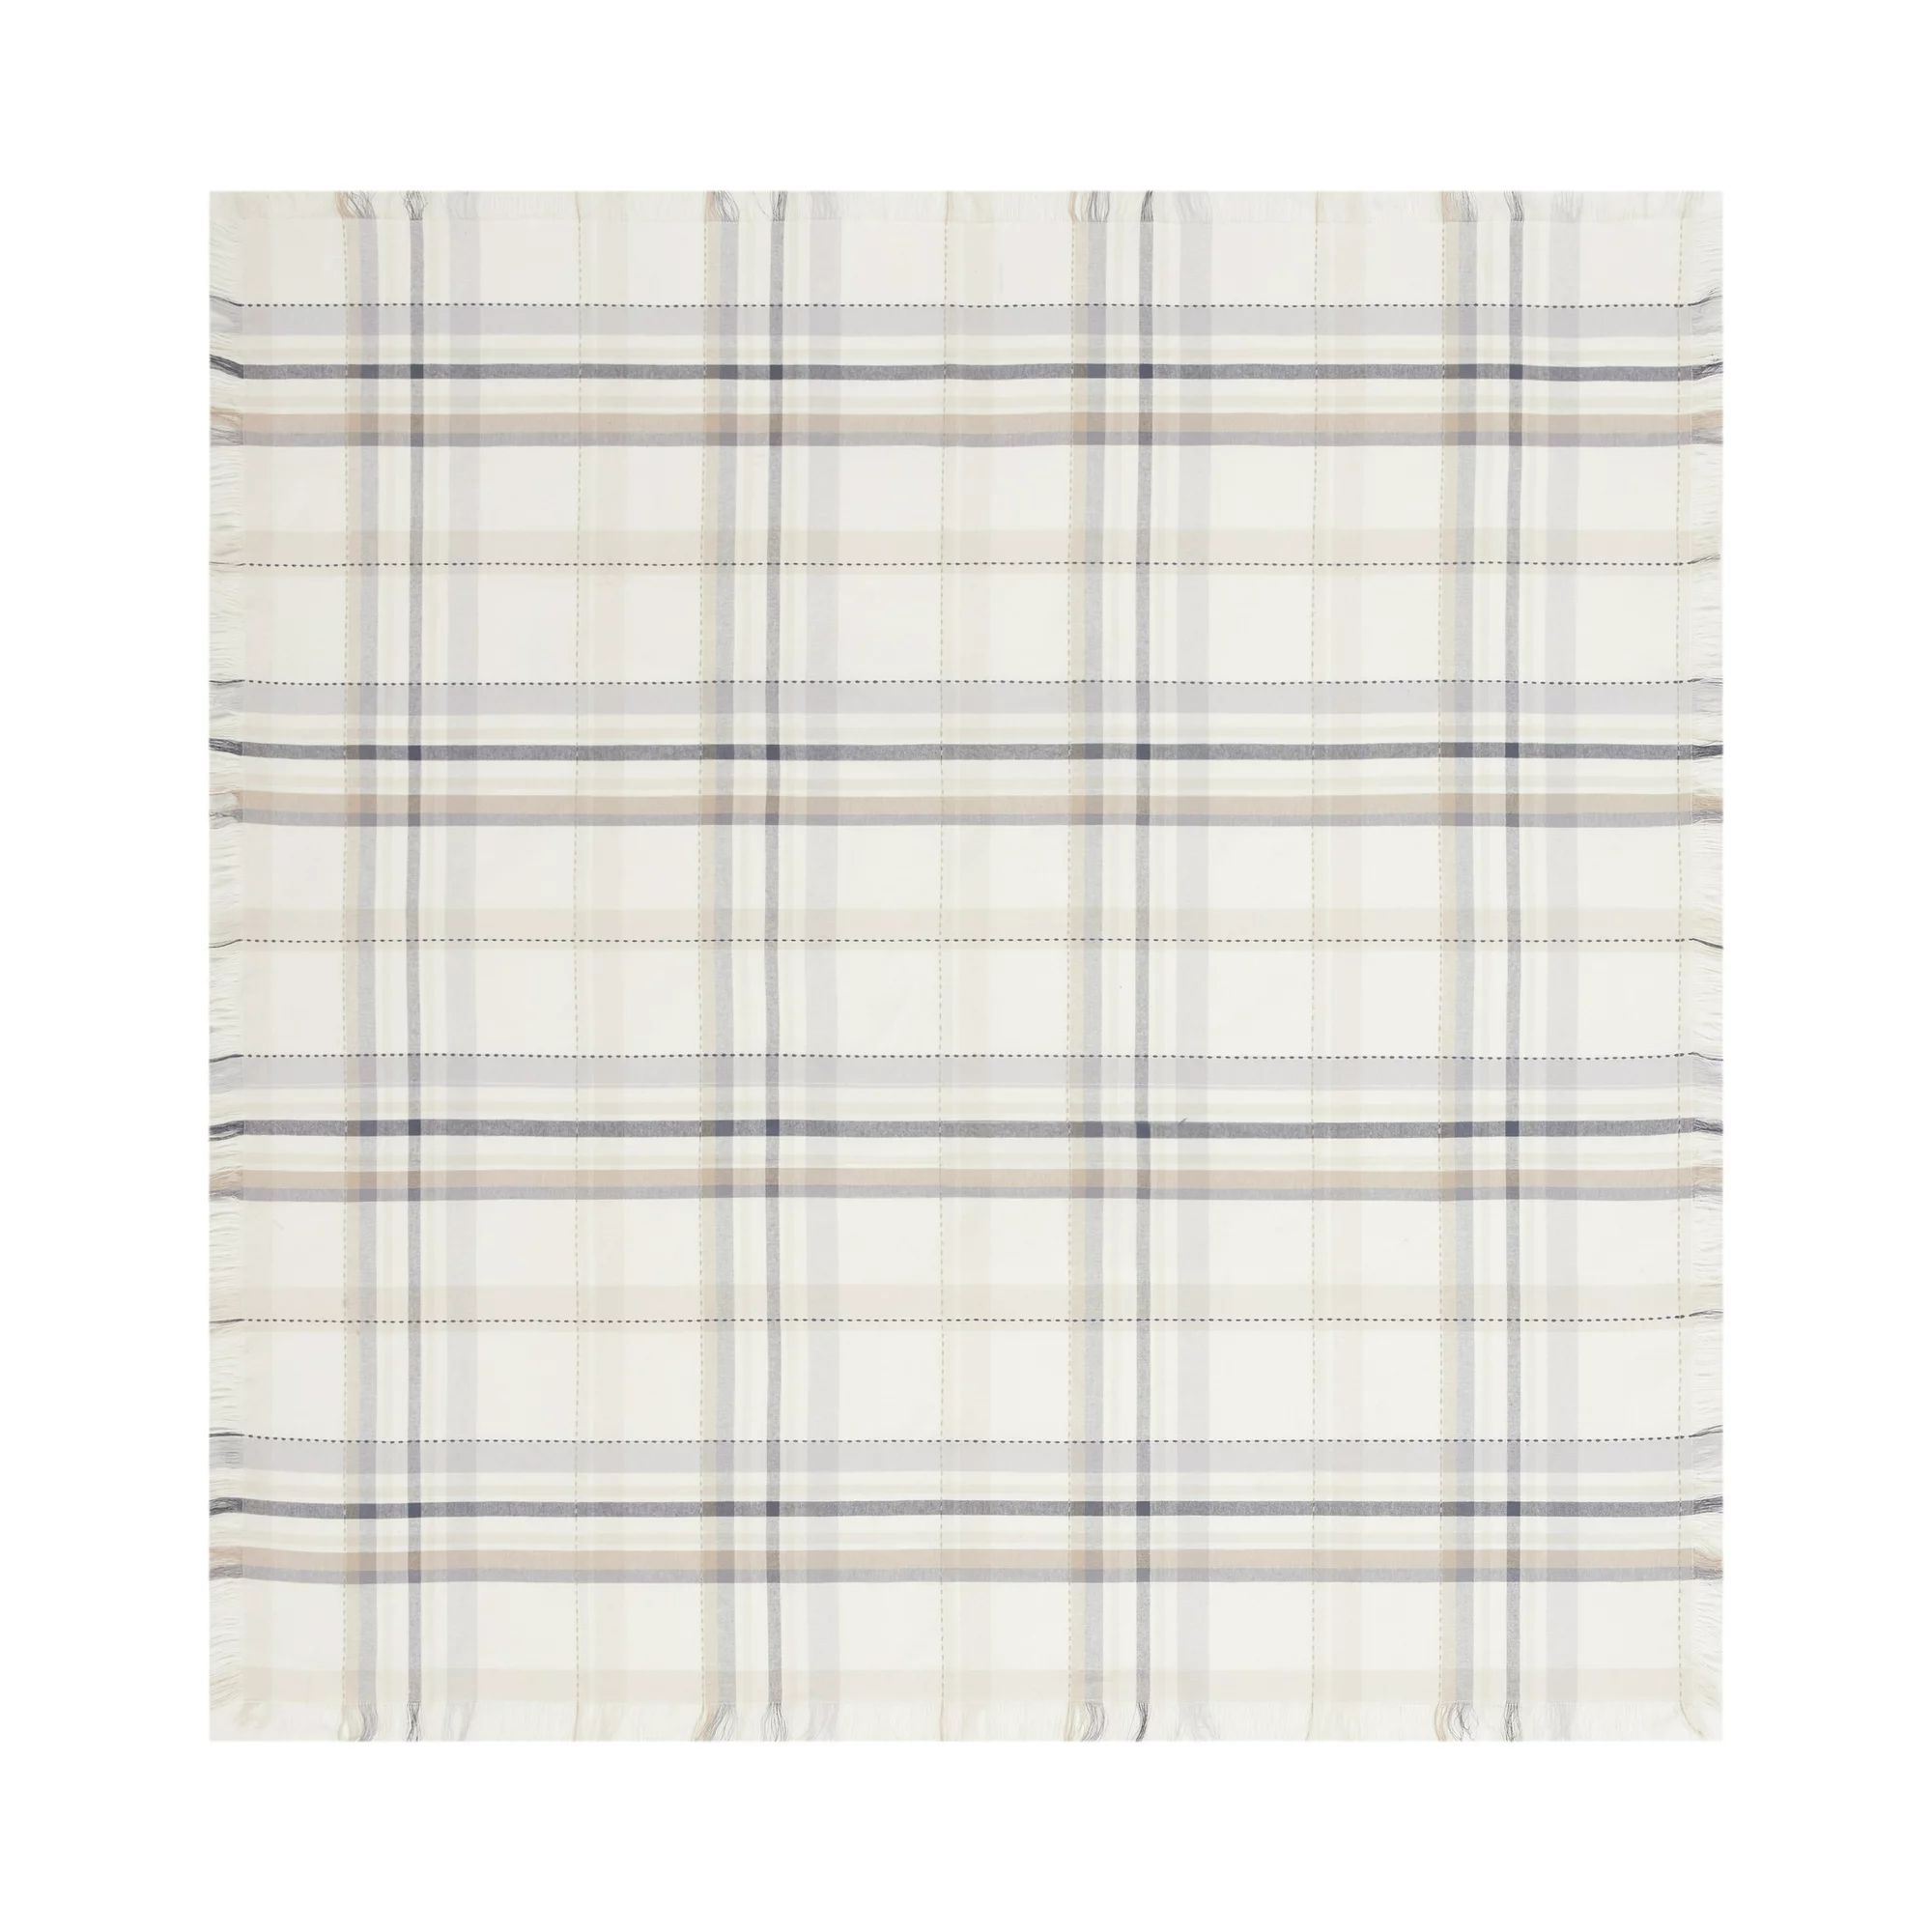 Better Homes and Gardens Monday Plaid Woven Table Throw - Multi color - 50"x50" | Walmart (US)